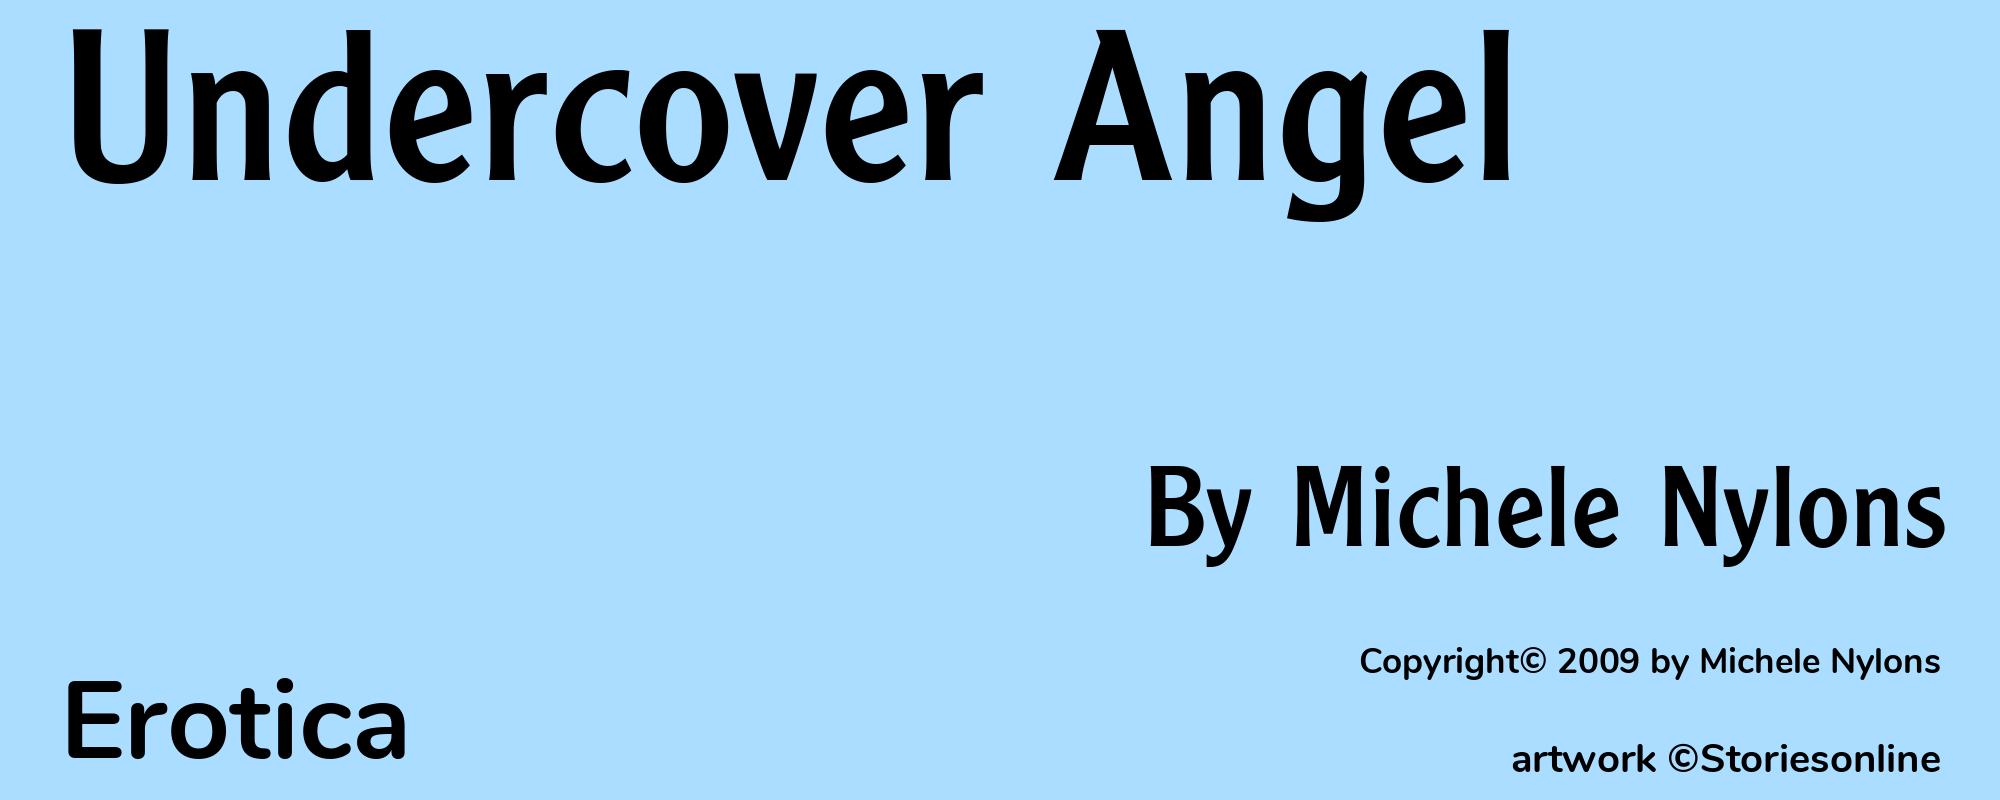 Undercover Angel - Cover